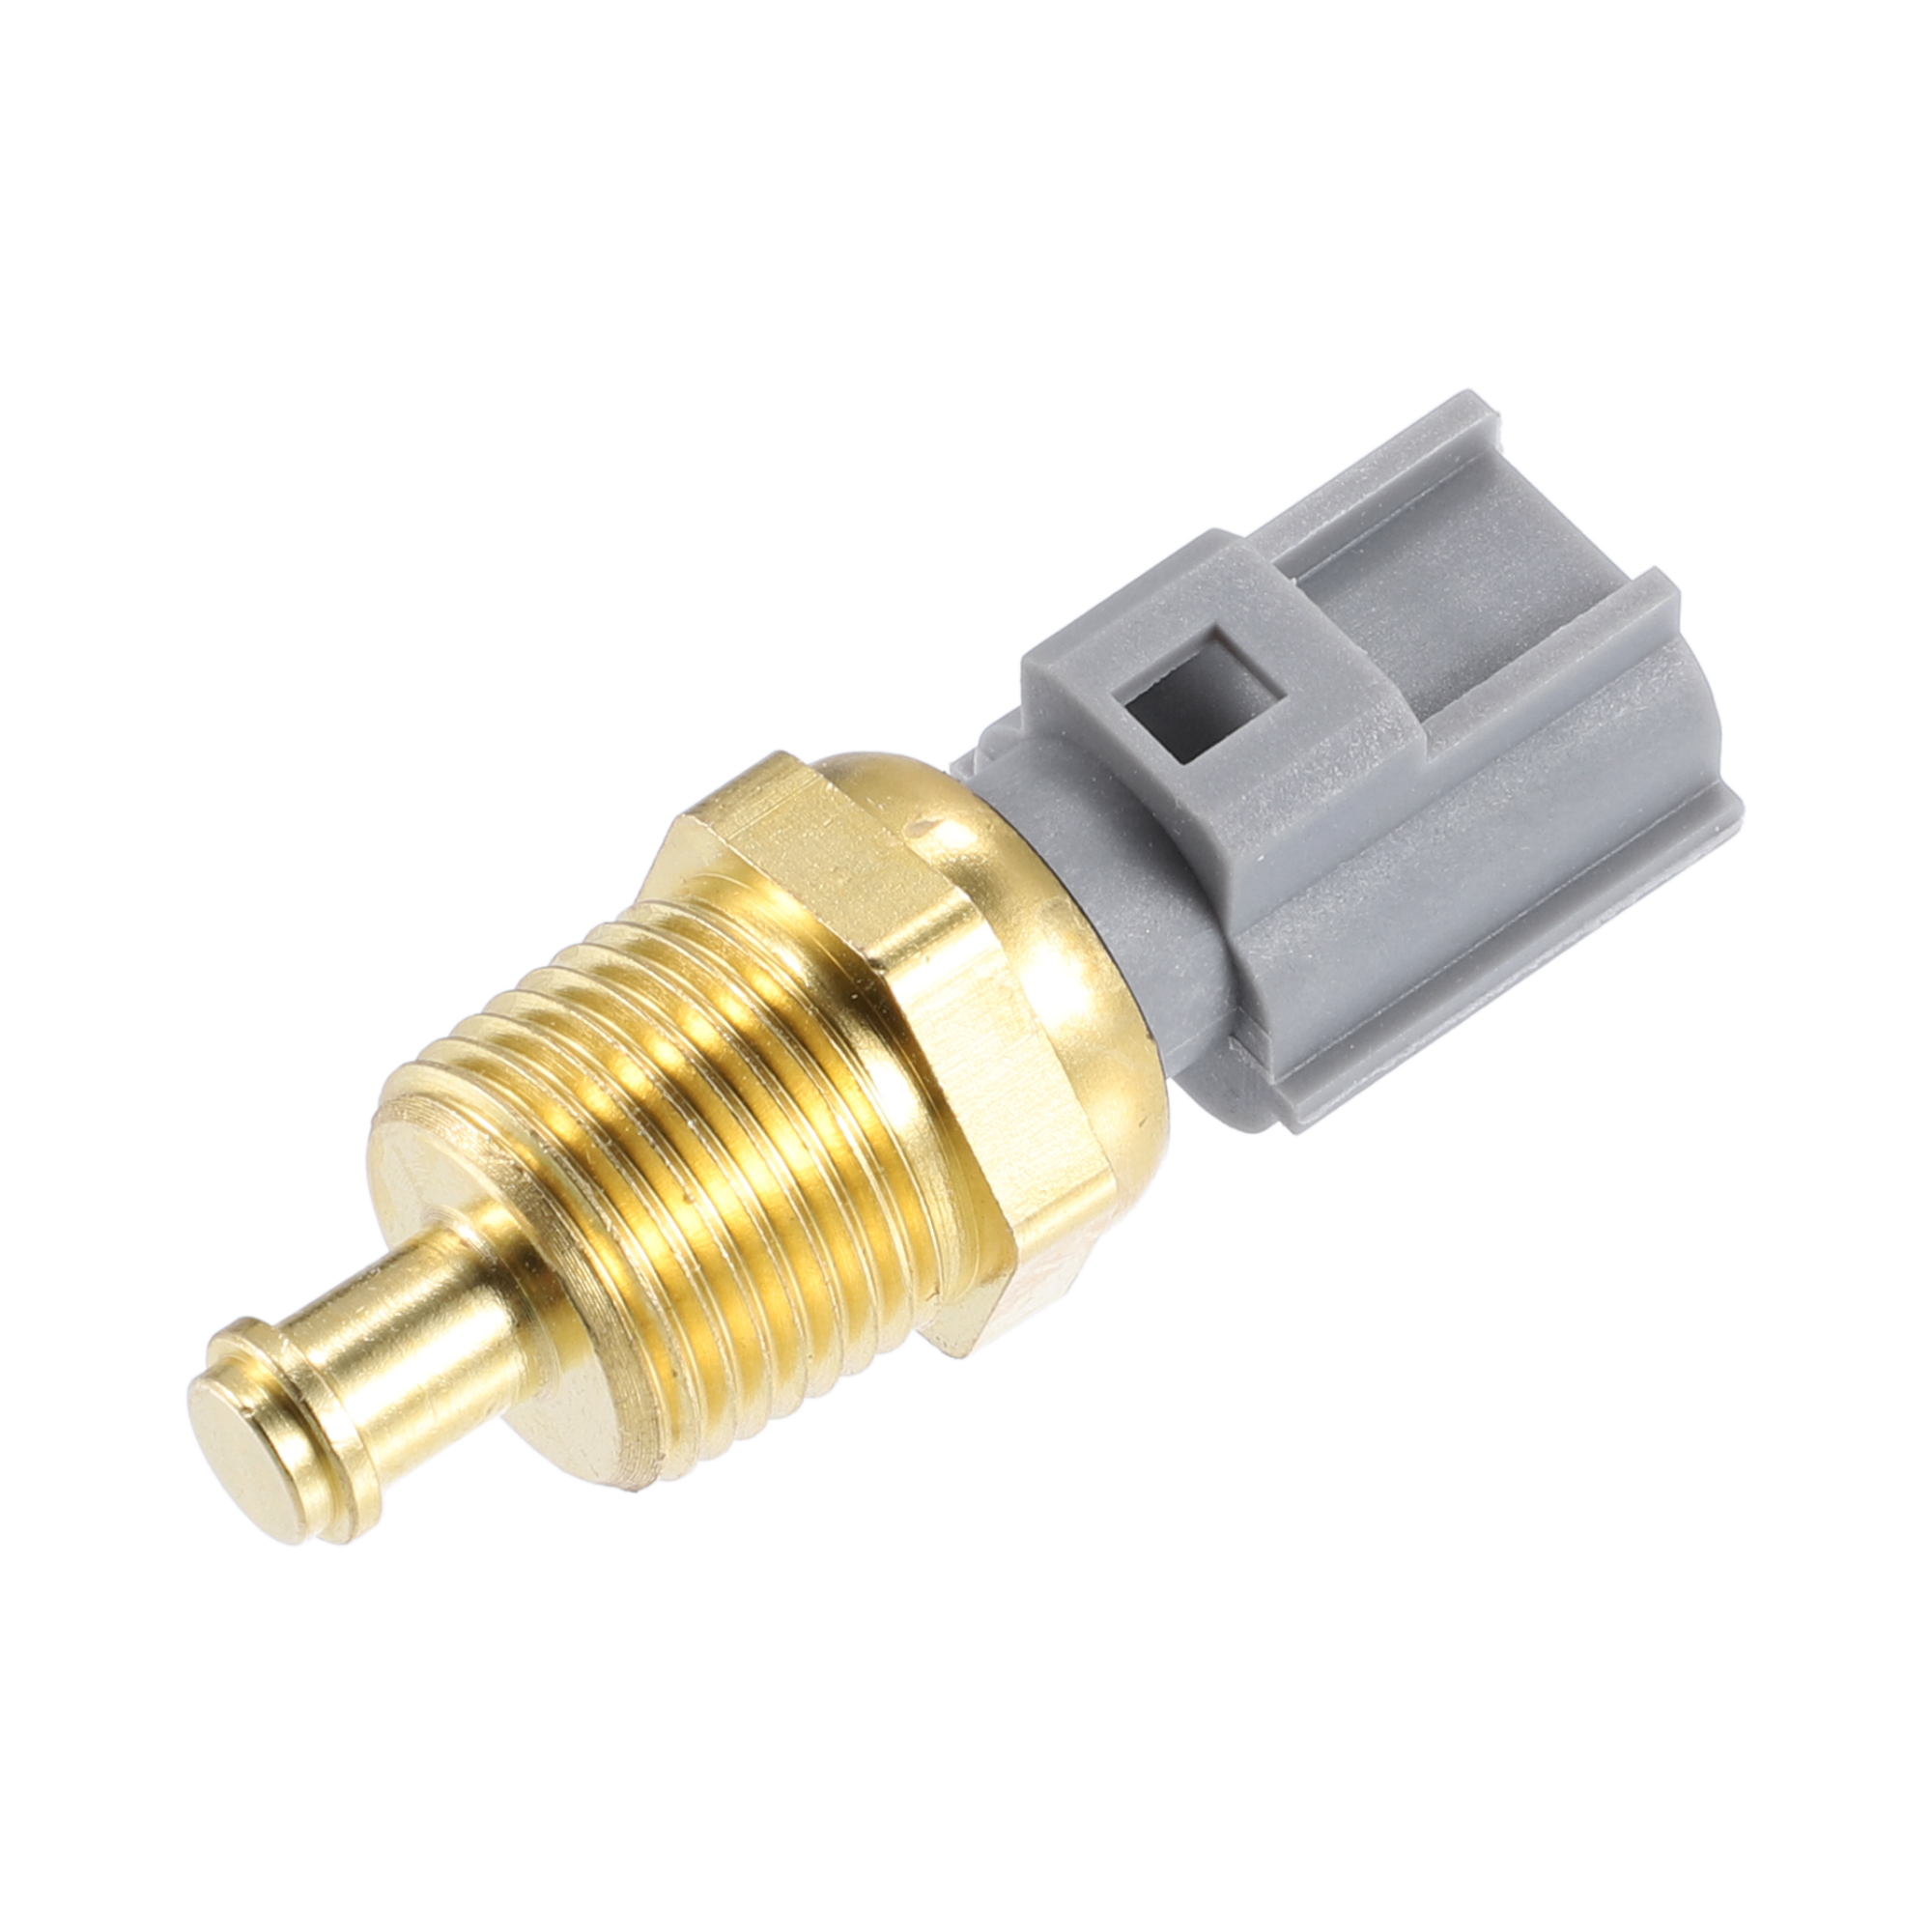 3F1Z12A648A Engine Coolant Temperature Sensor Temp Sender for Ford for Mustang - image 5 of 6